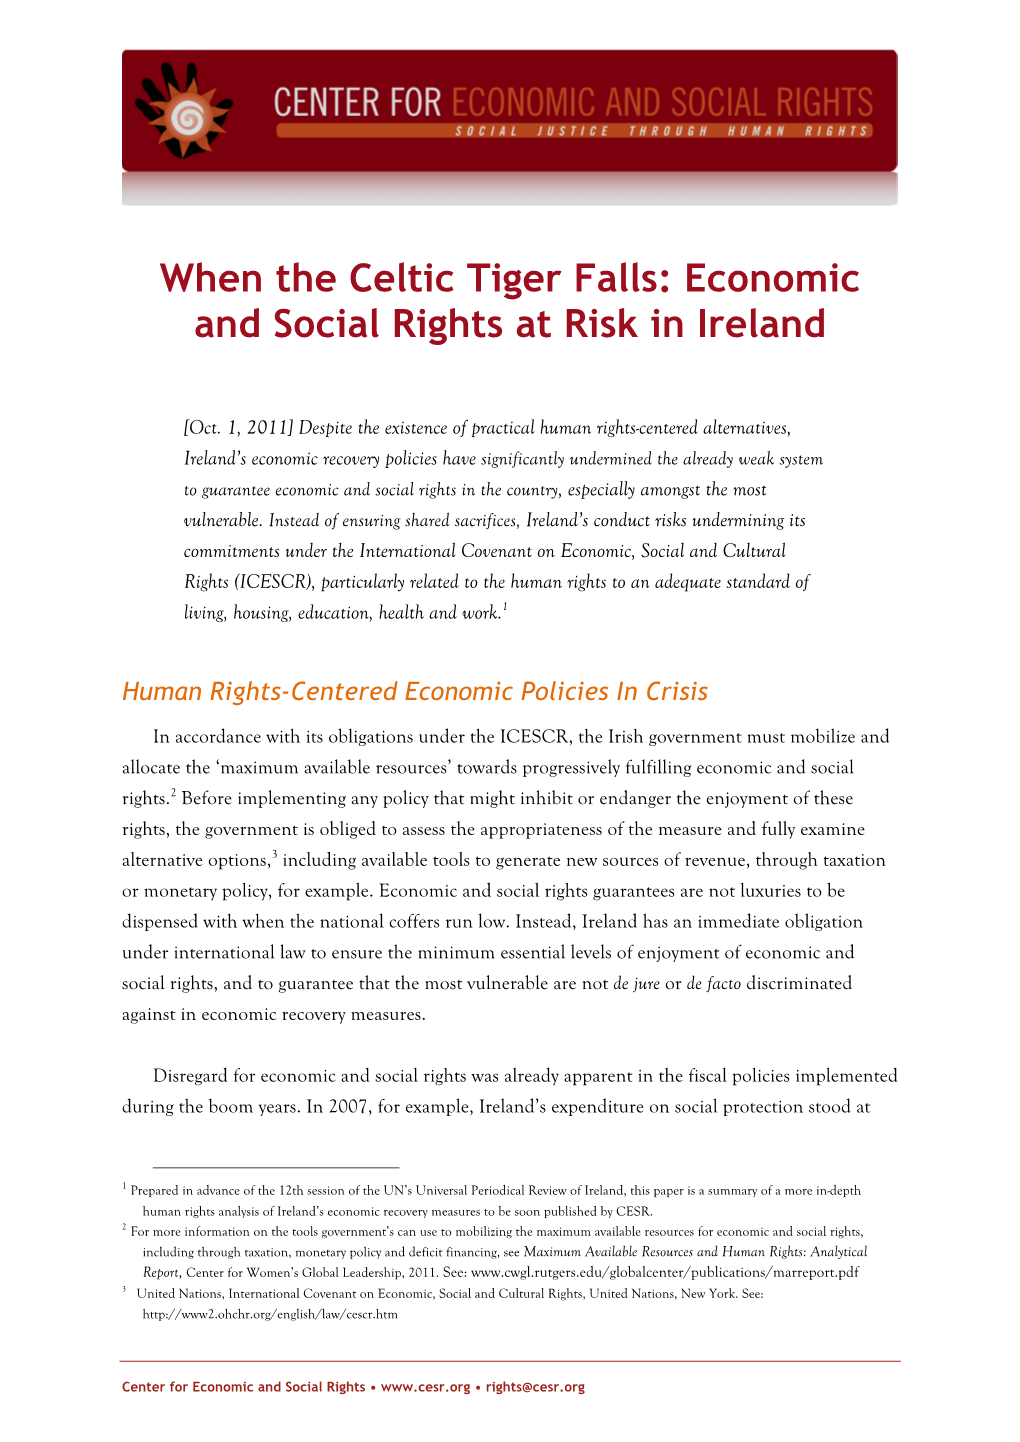 When the Celtic Tiger Falls: Economic and Social Rights at Risk in Ireland